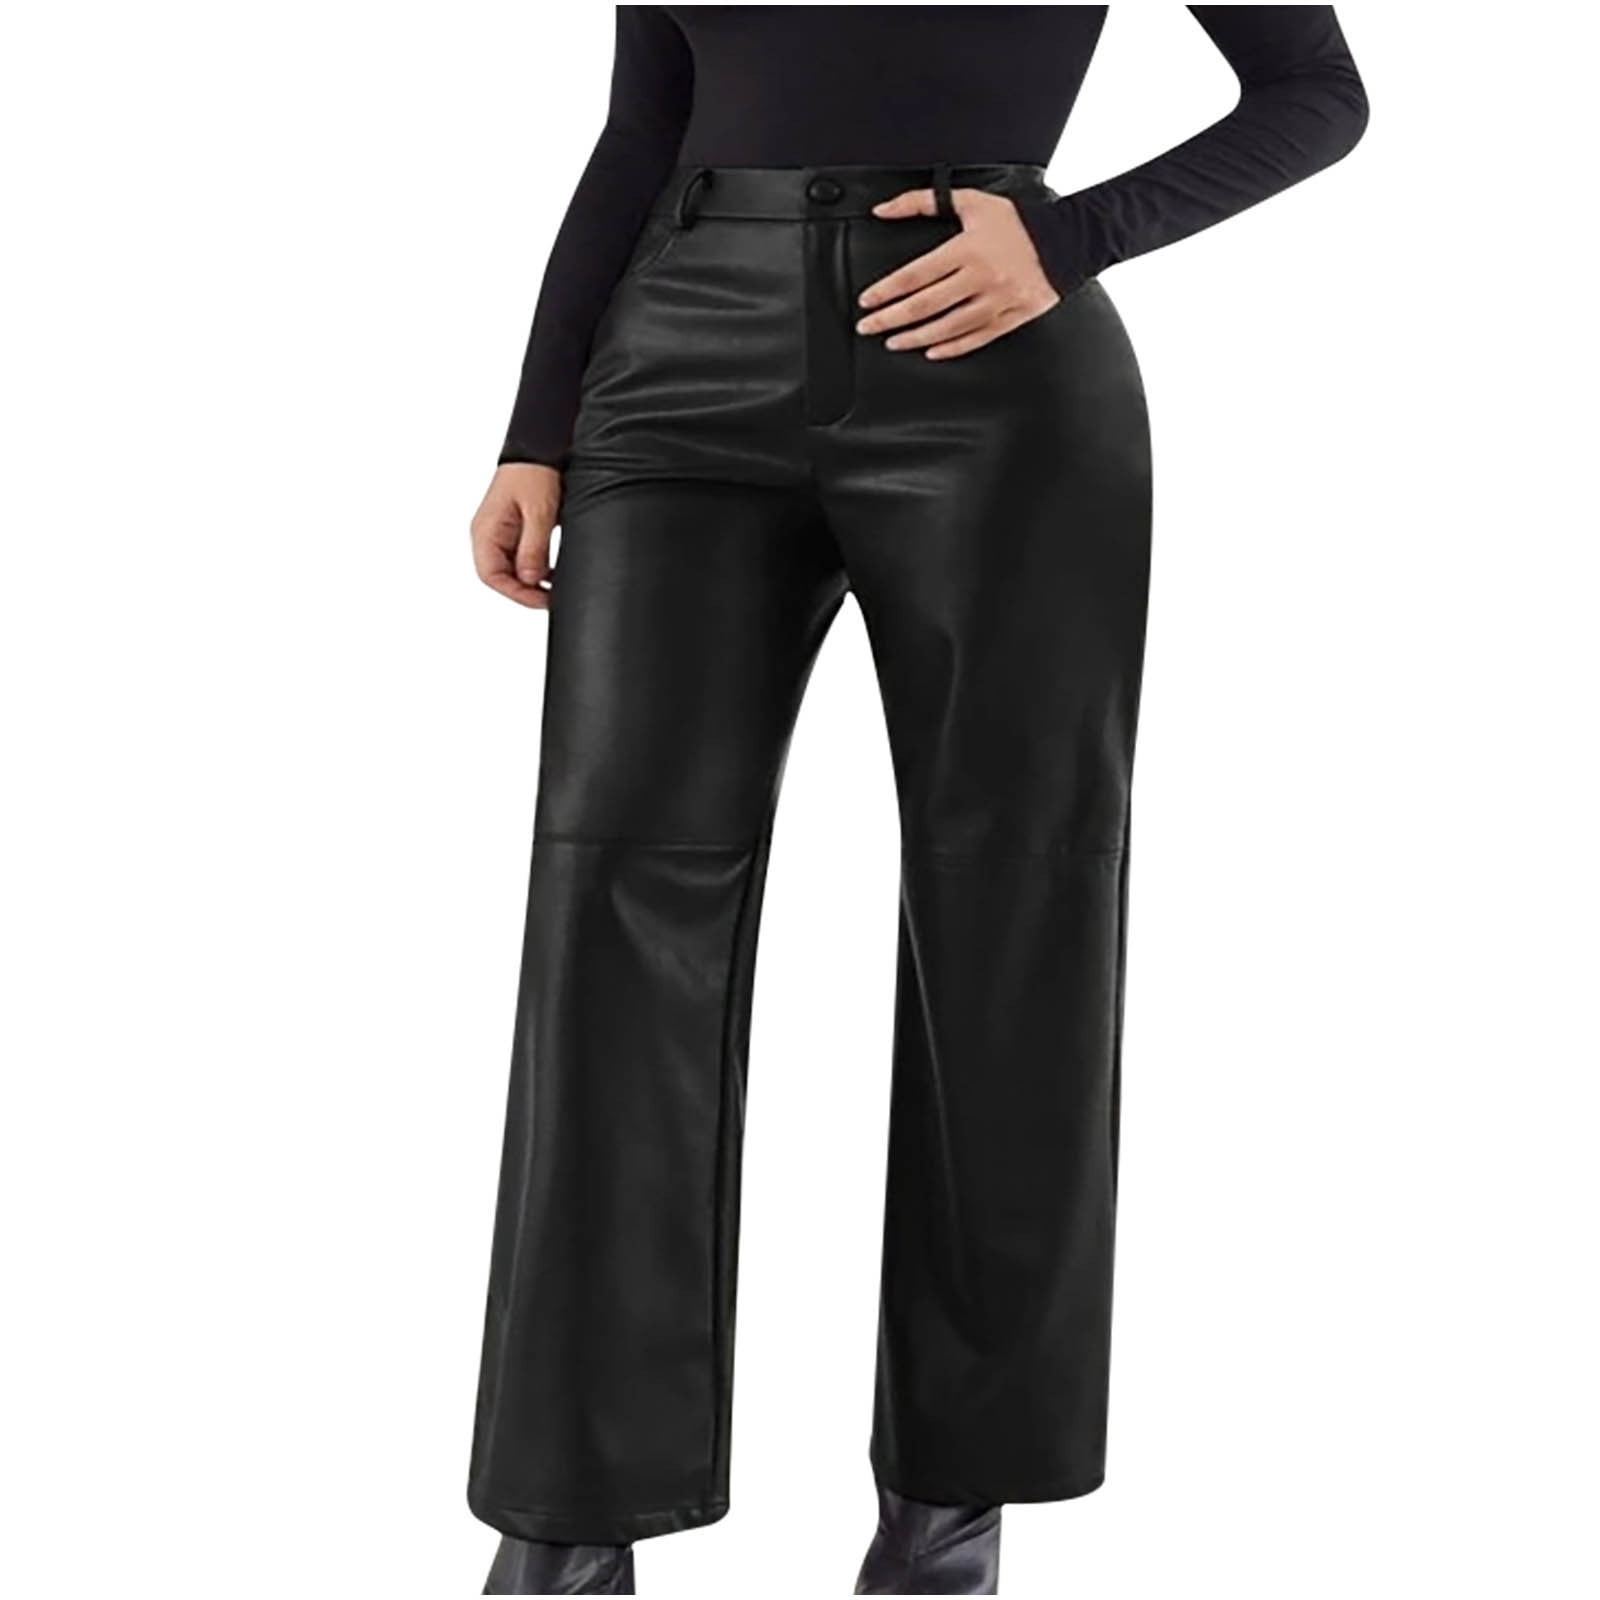 Leather Business Pants Accessories